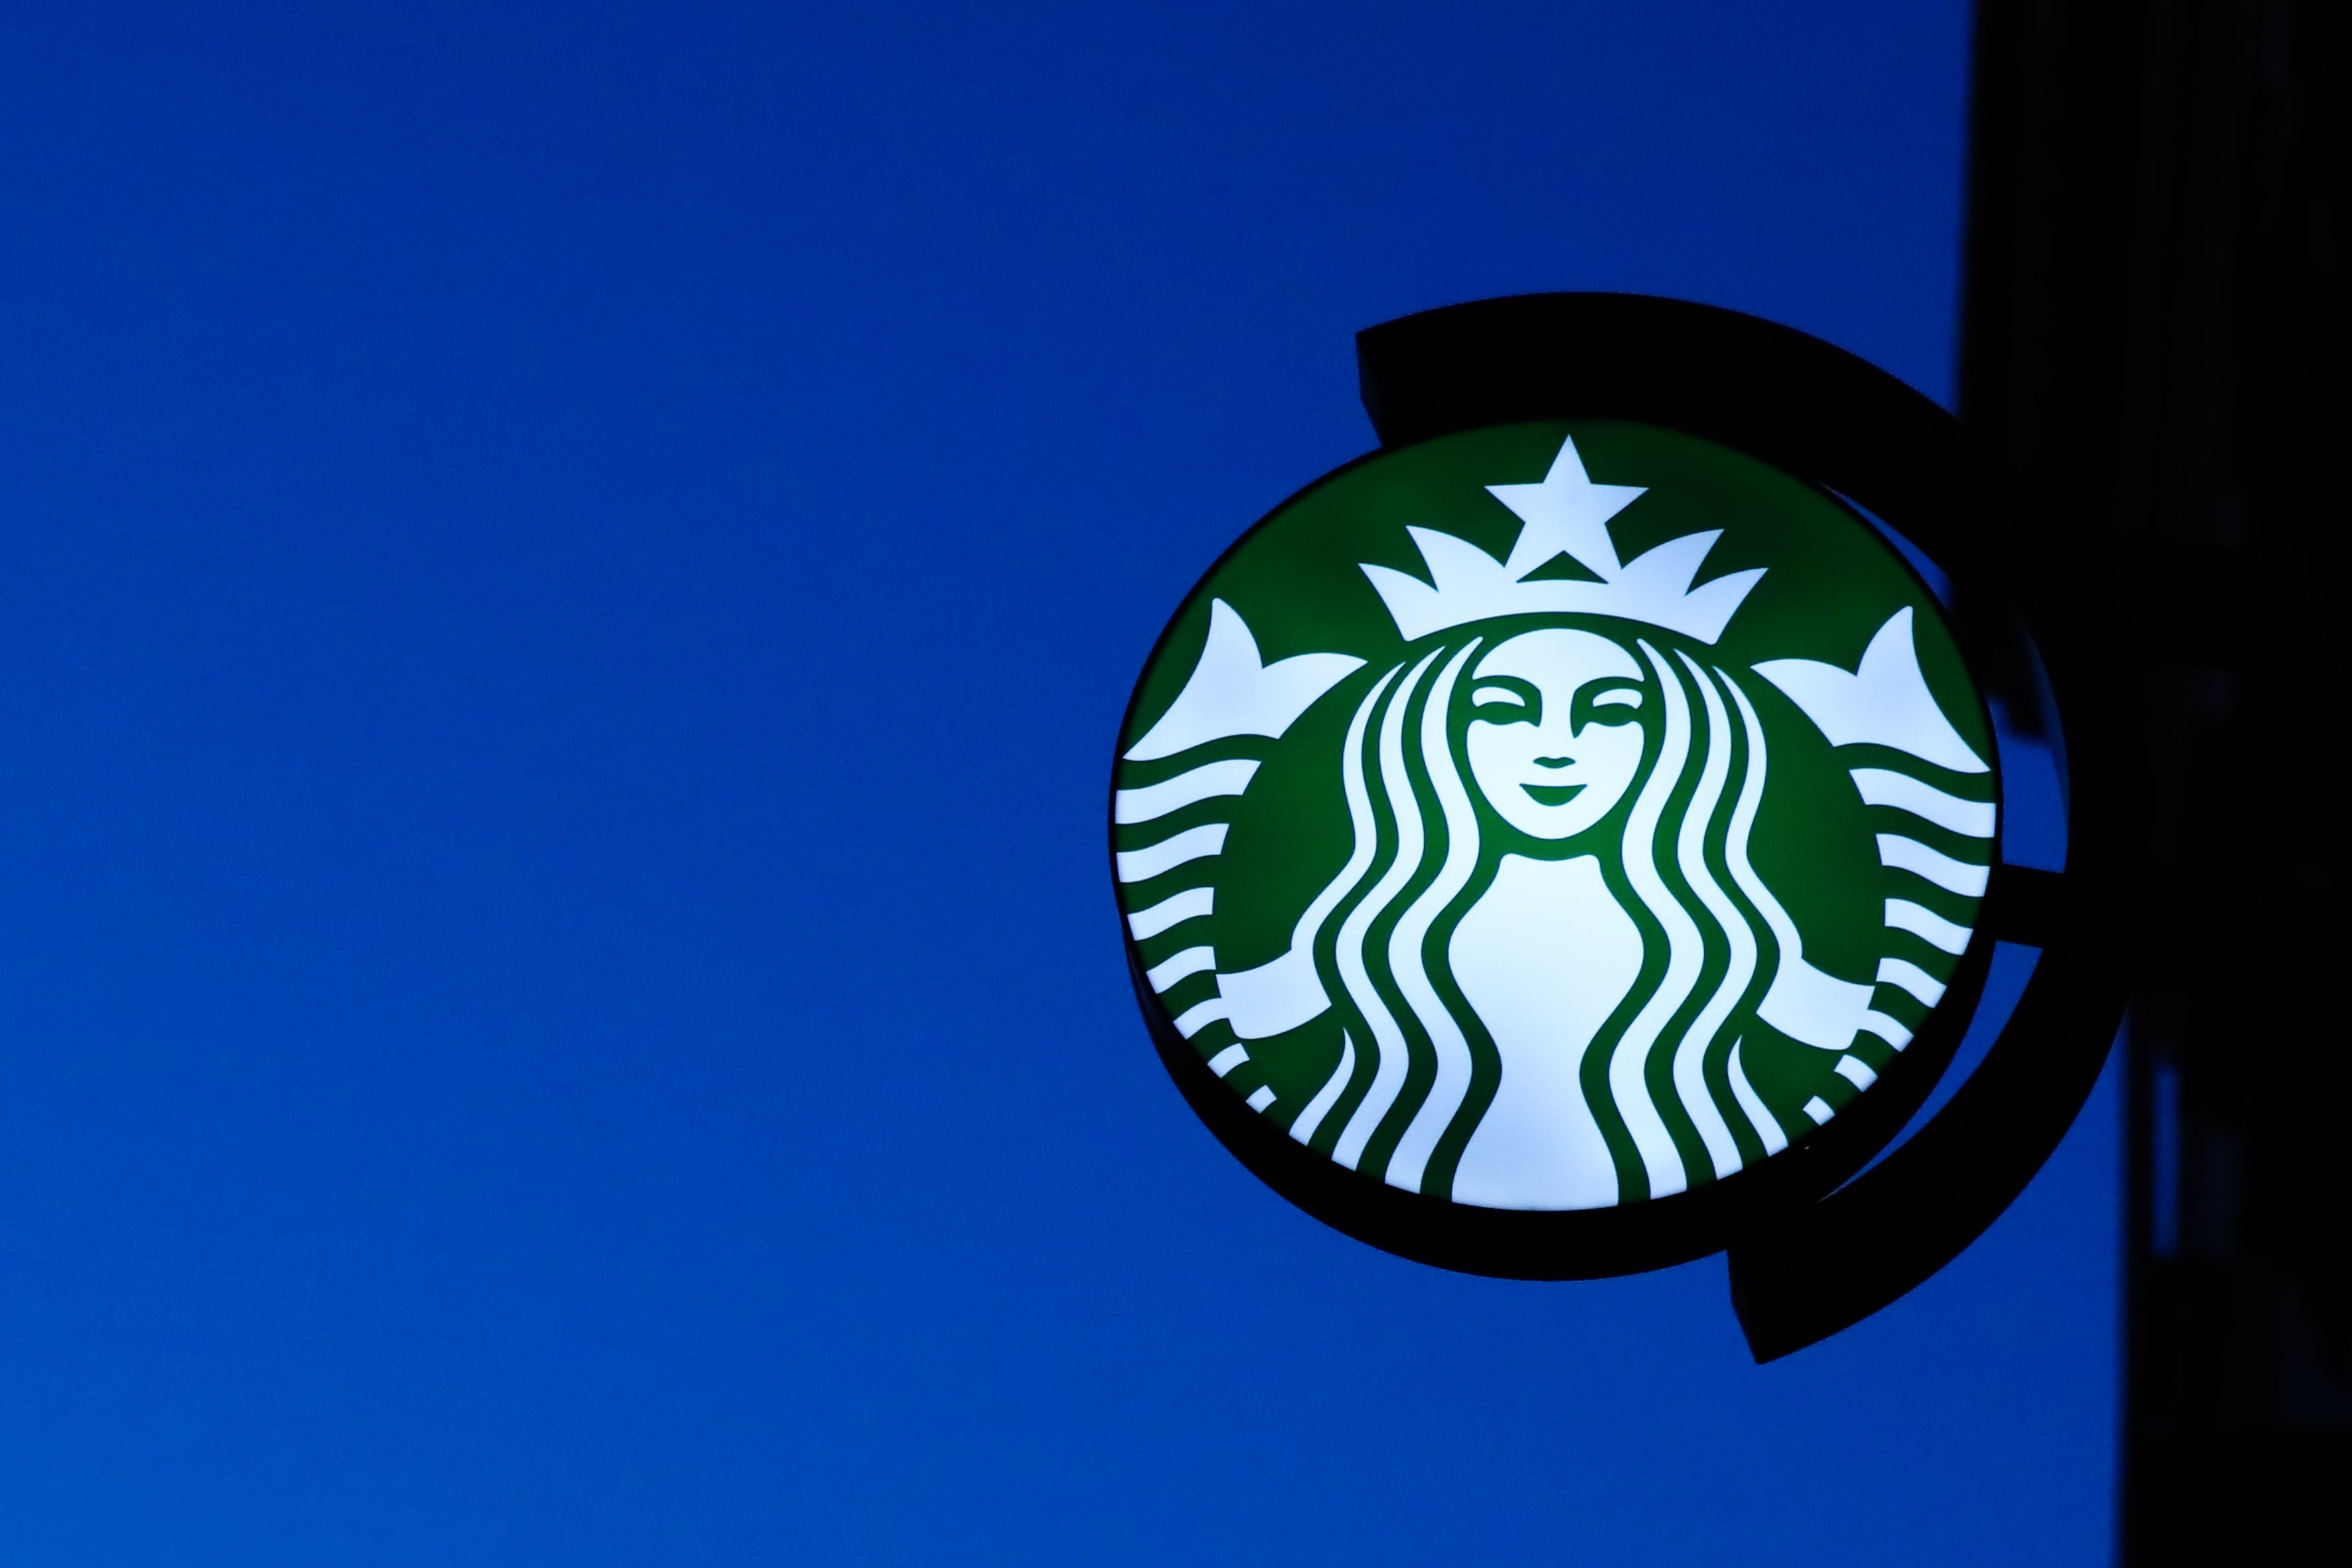 Starbucks Manager Fired After Arrests Of 2 Black Men Sues For Racial Bias